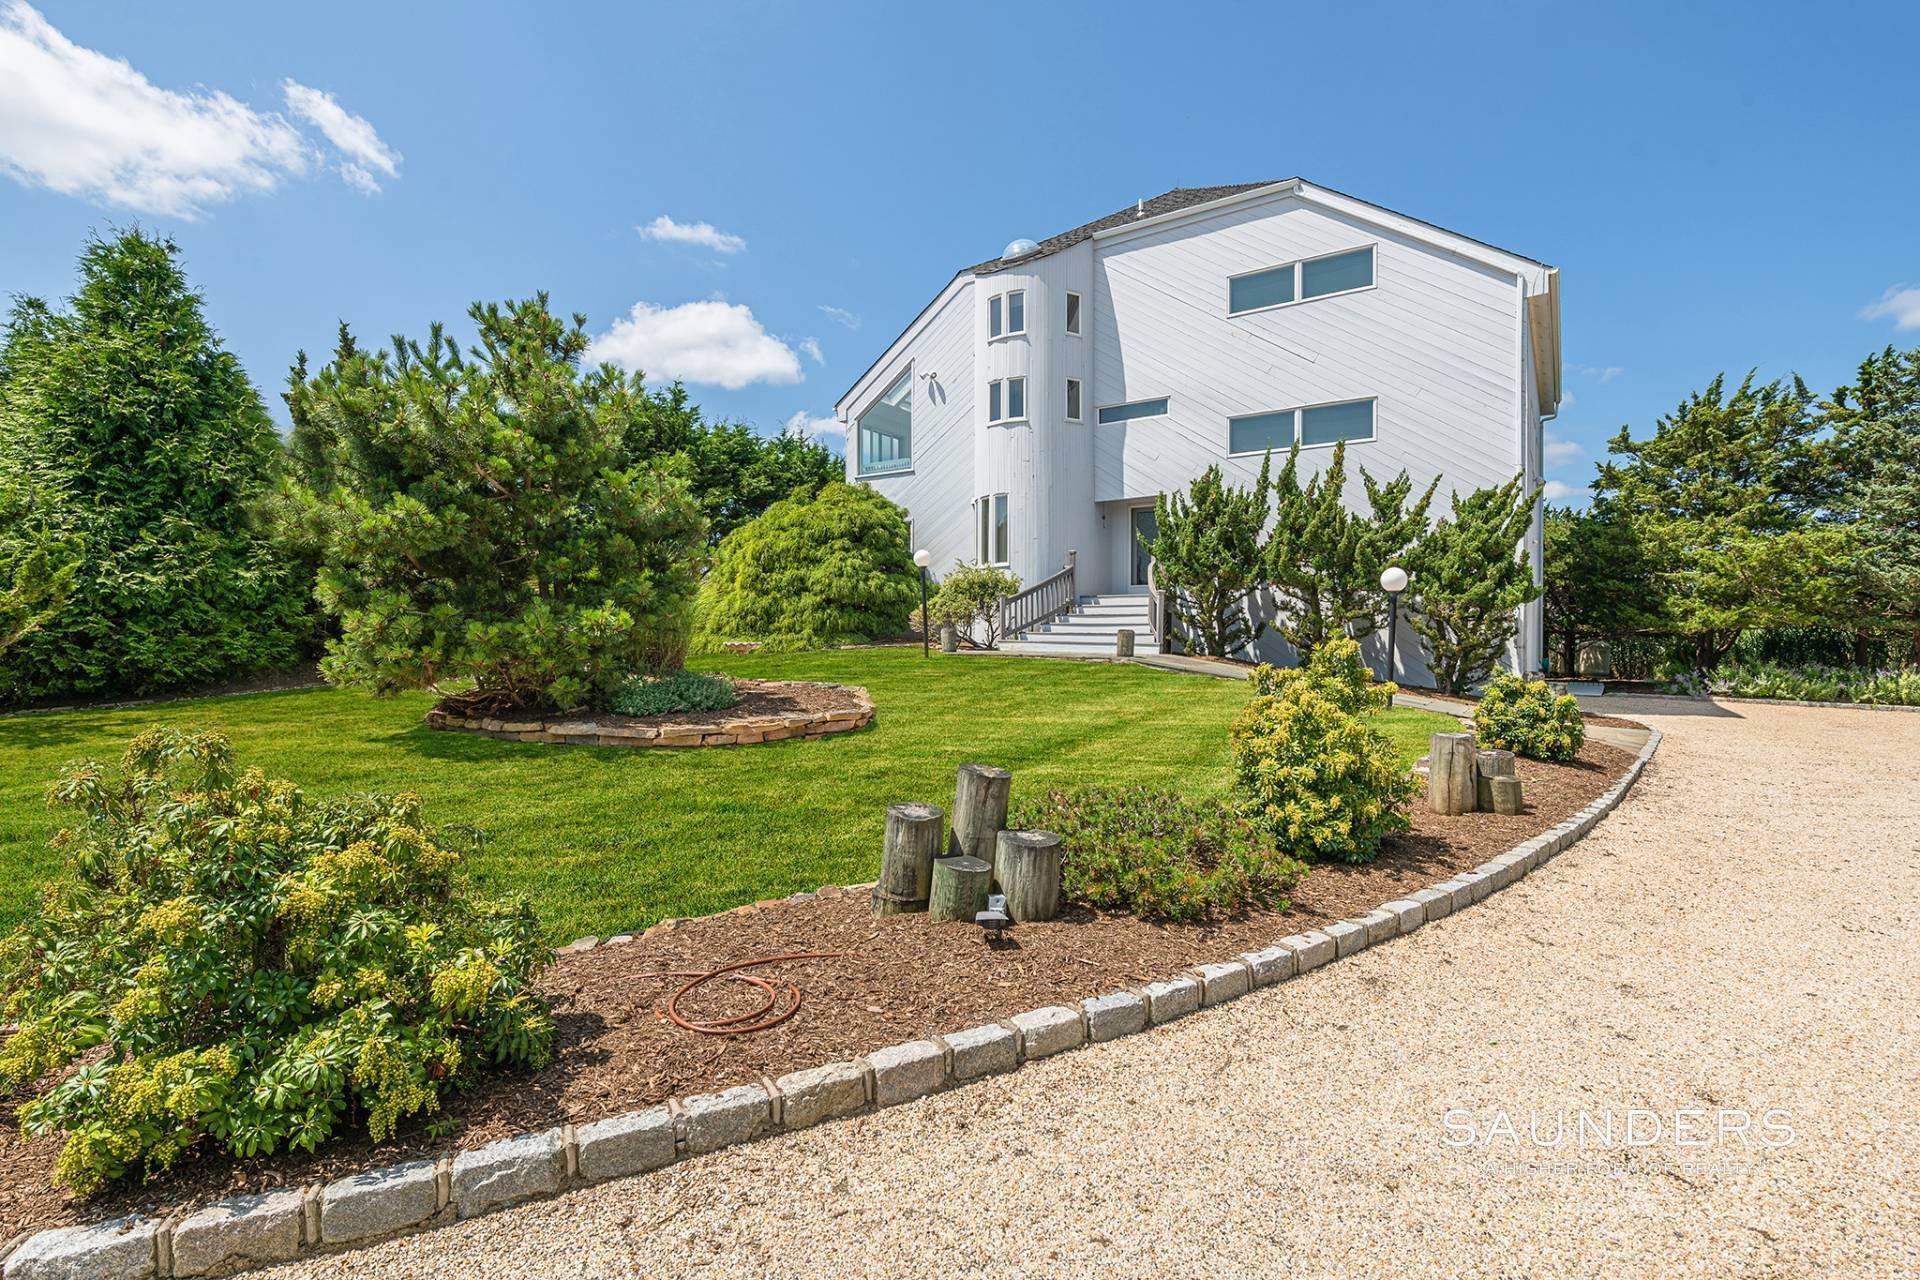 2. Single Family Homes for Sale at Serenity In The Heart Of The Village 20 Stacy Drive, Westhampton Beach Village, NY 11978